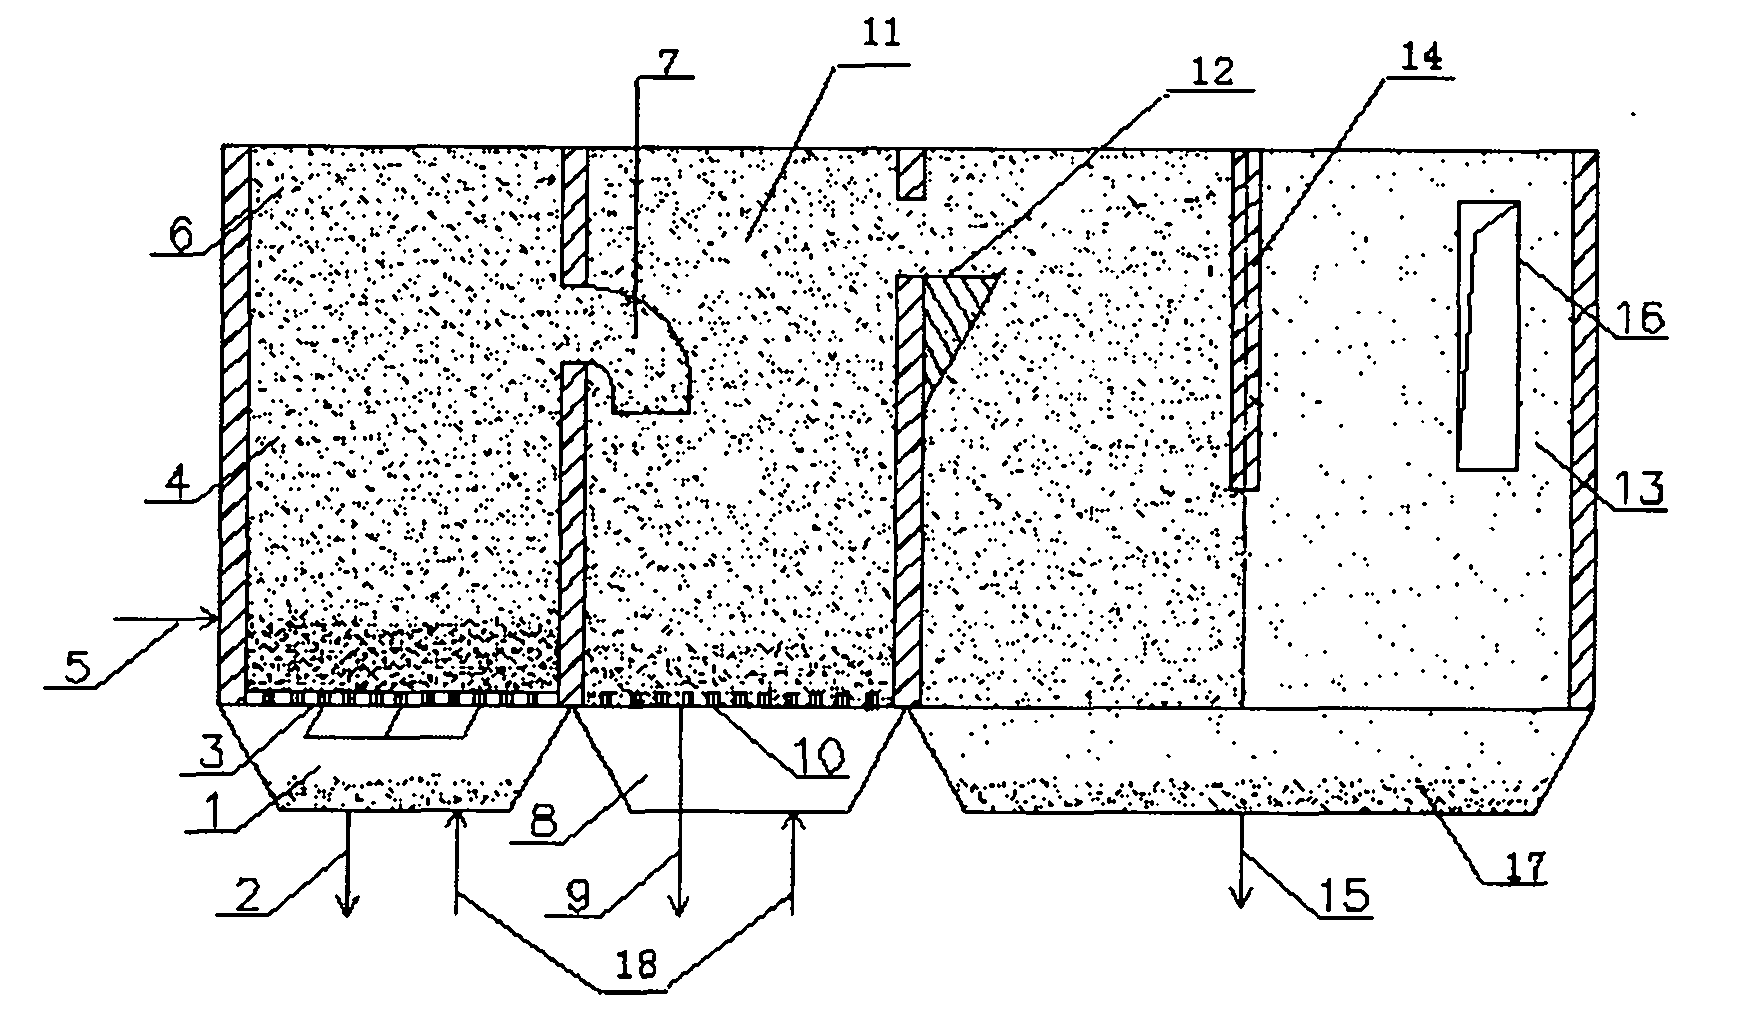 Combustion device for biomass granular fuel